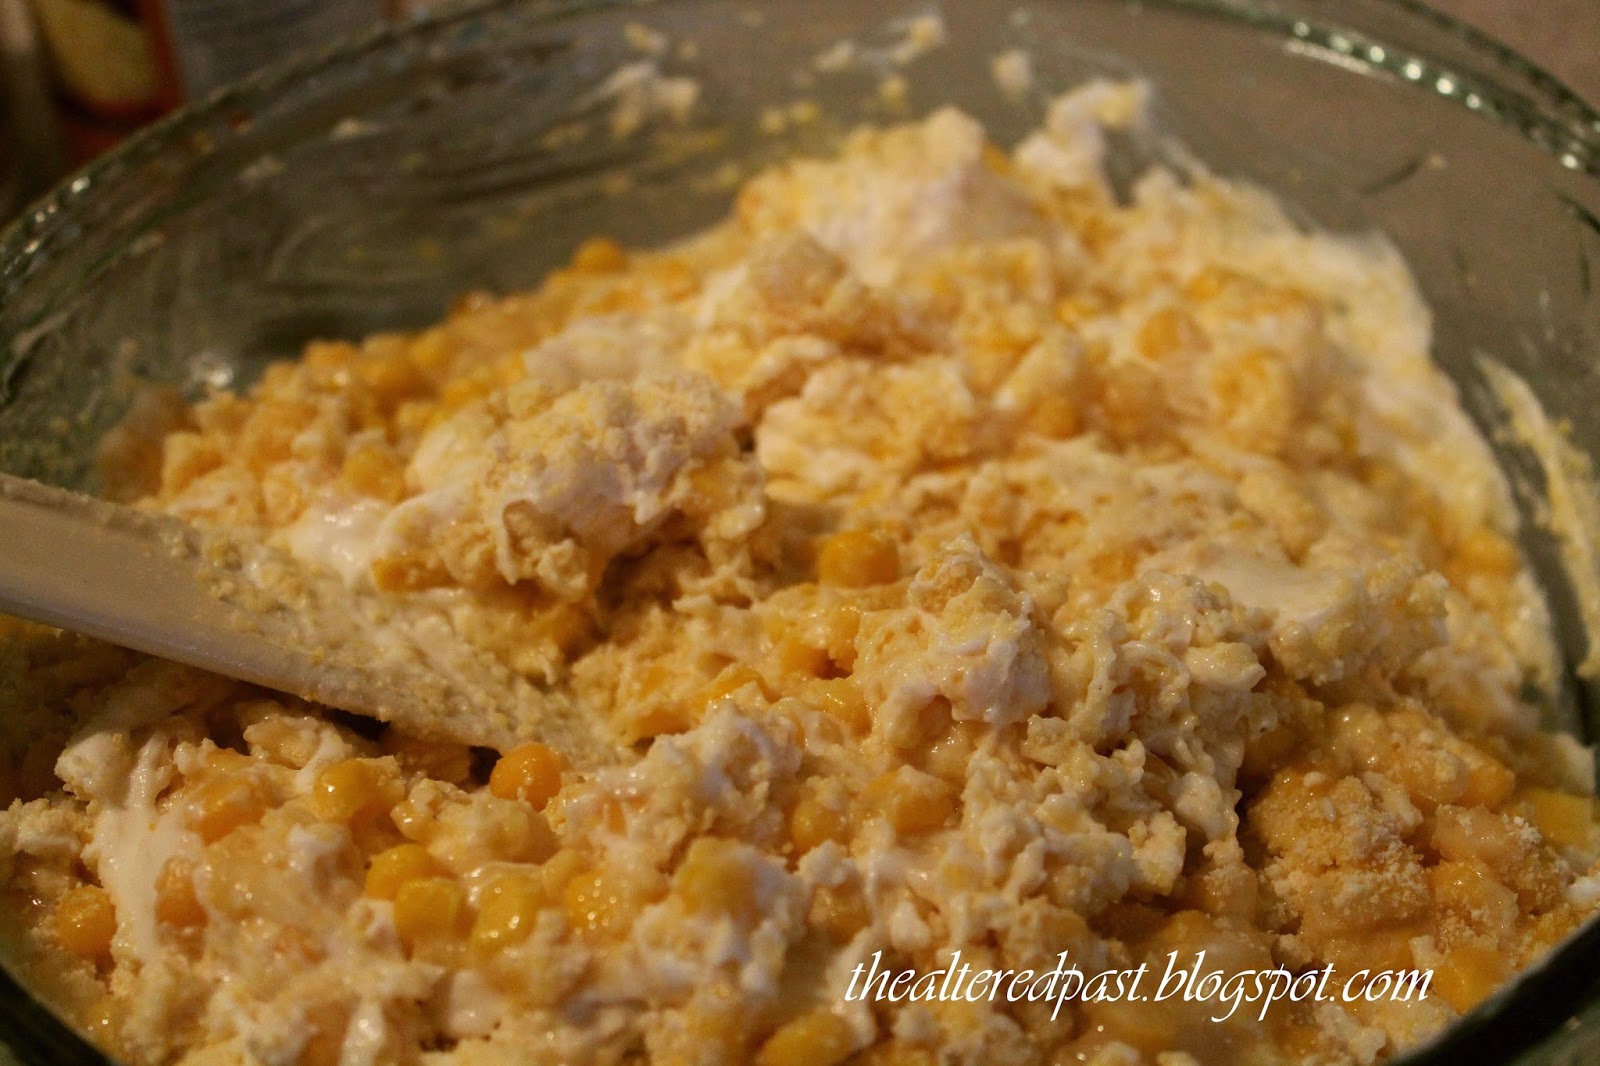 the best corn pudding recipe, the altered past